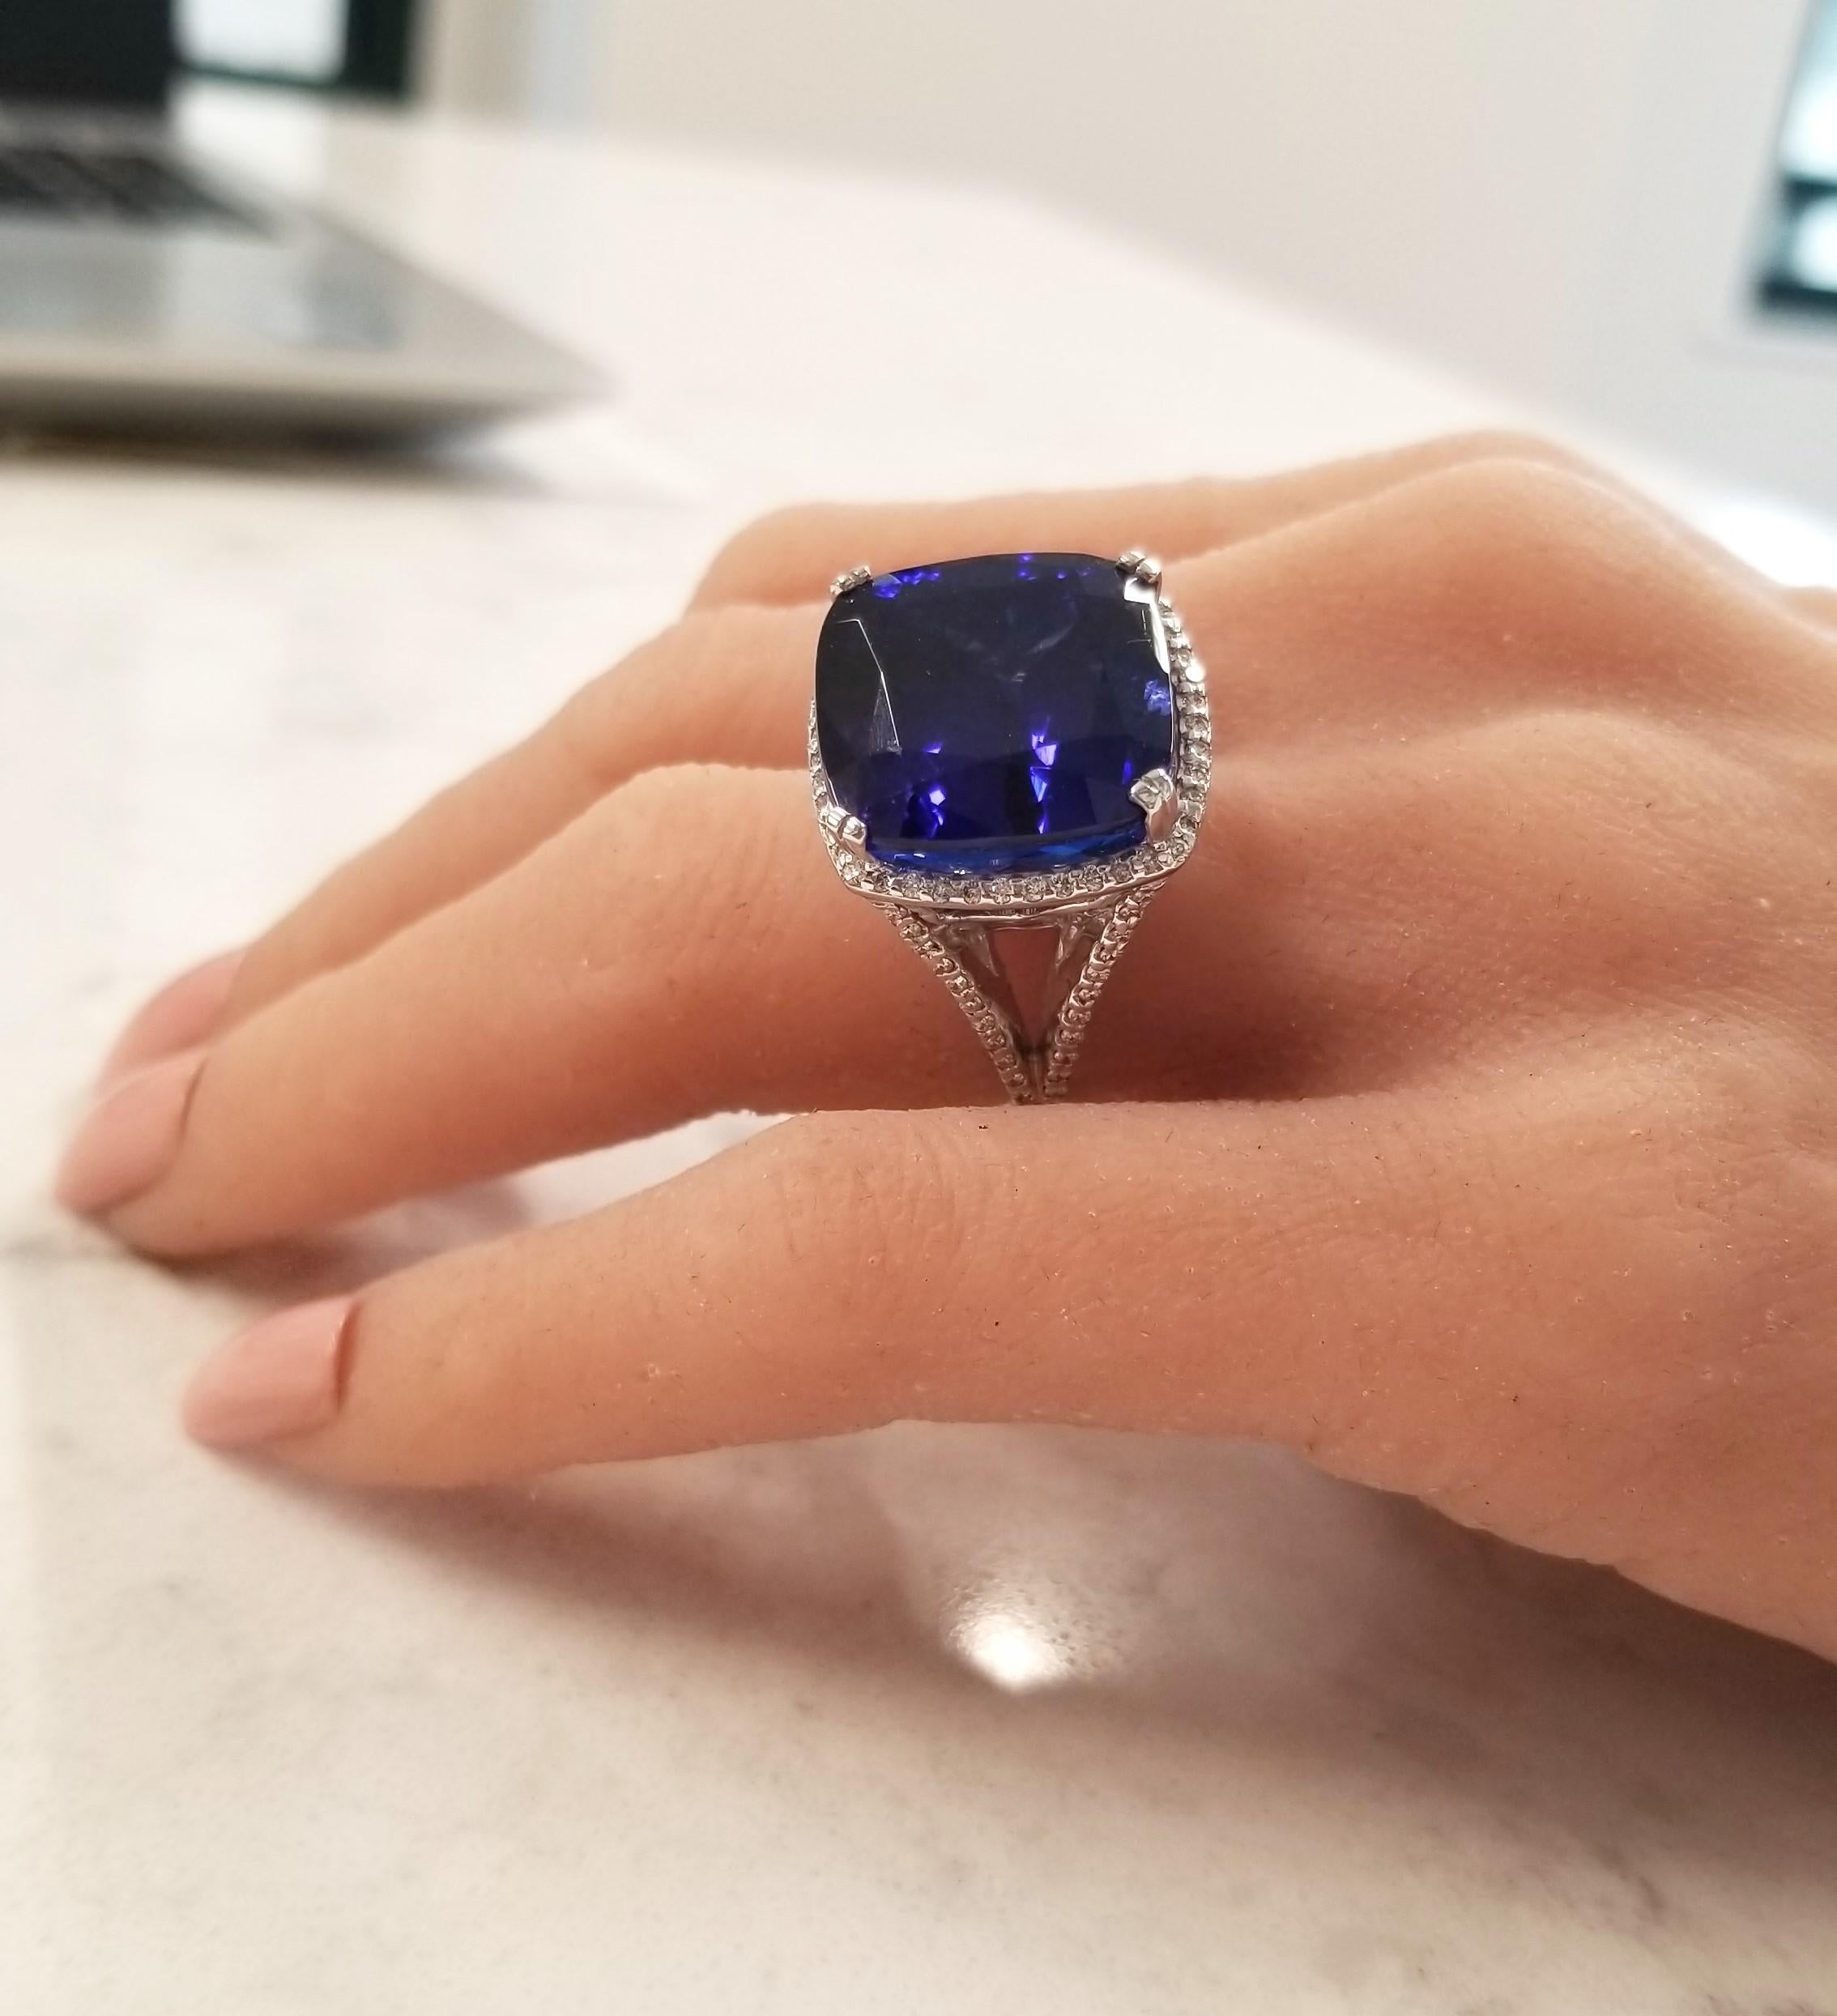 Catch every eye when you enter a room wearing this spectacular ring! No one will be able to resist being captivated by the gorgeous and bold 27.4 carat – 16.87 x 16.82 millimeter tanzanite center. This gem is big, it's bold, and it's rare. The color